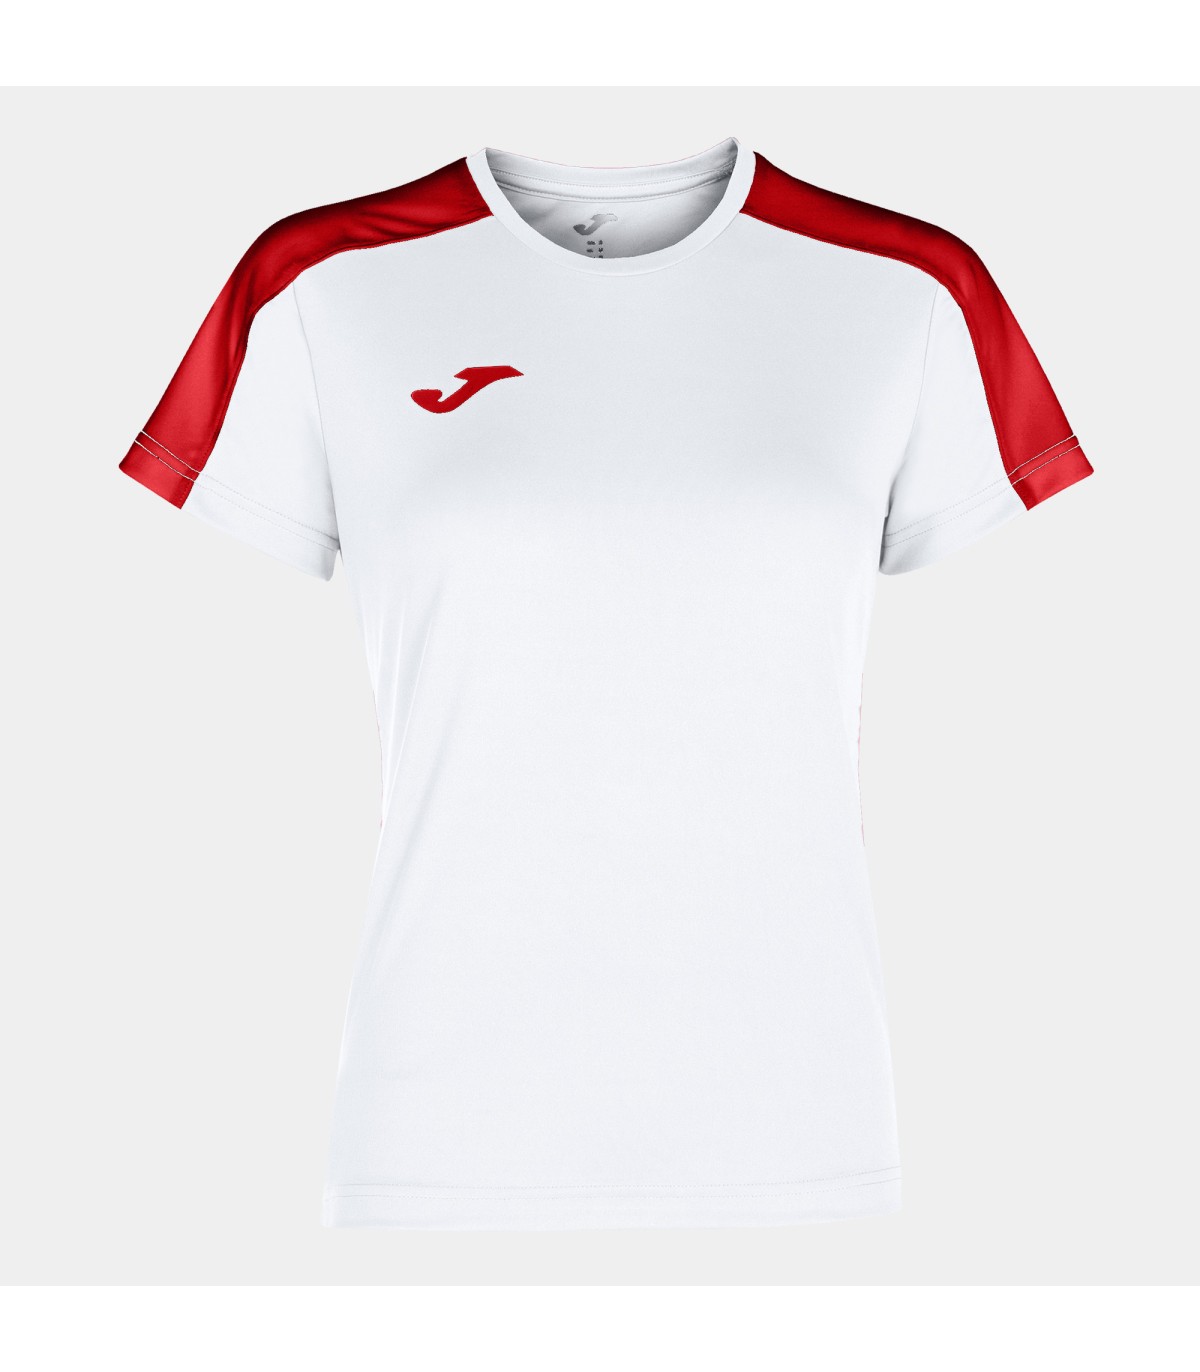 Overjas Laag Antagonist Dames Academy T-shirt Wit - Rood